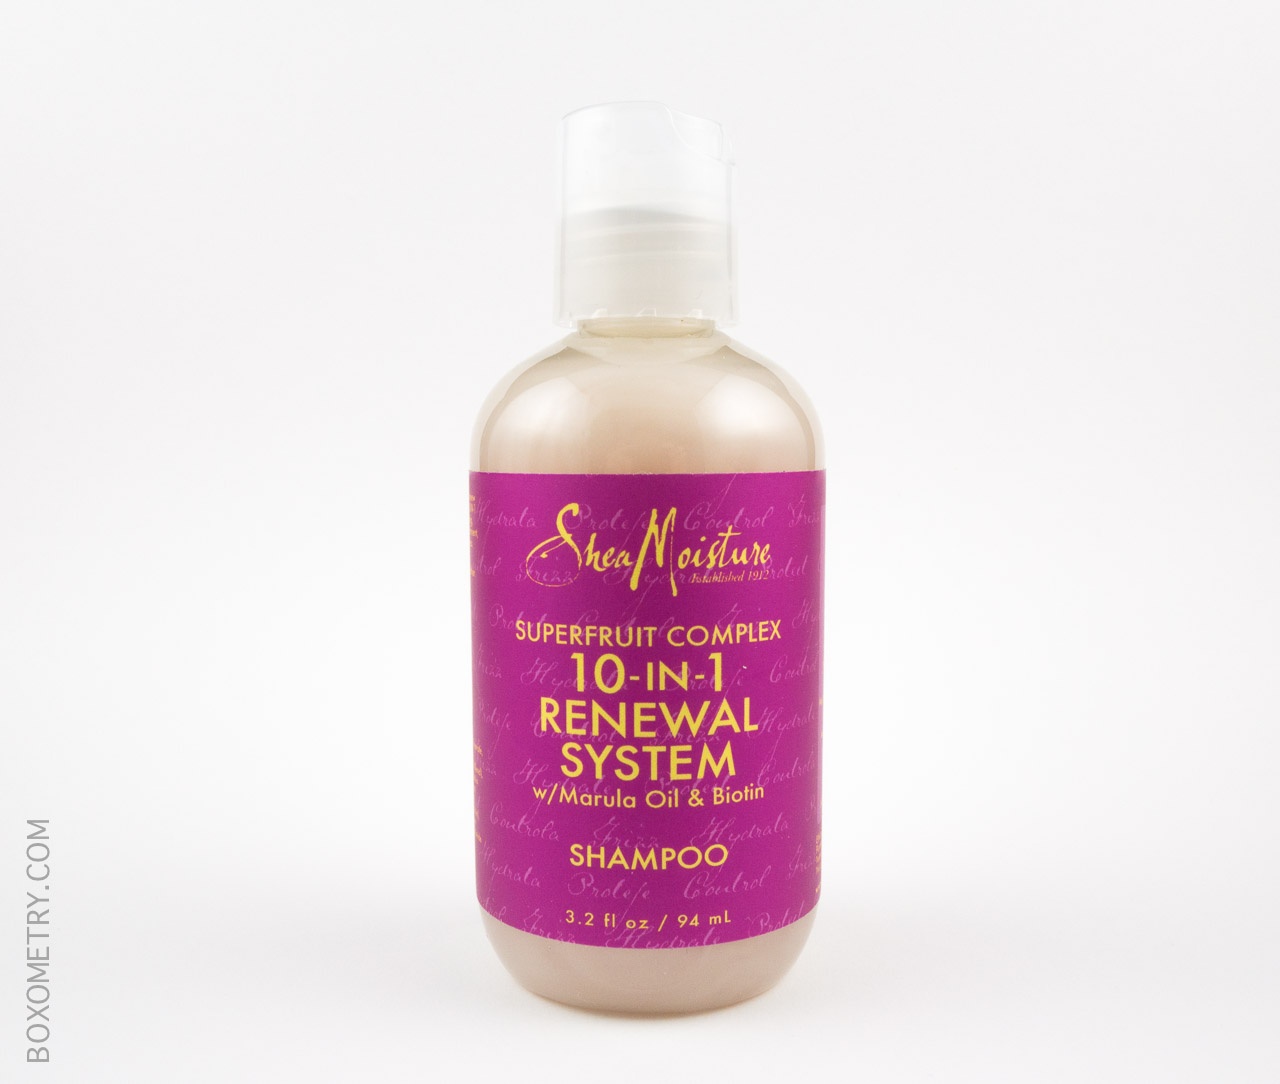 SheaMoisture Superfruit Complex 10-in-1 Renewal System Shampoo